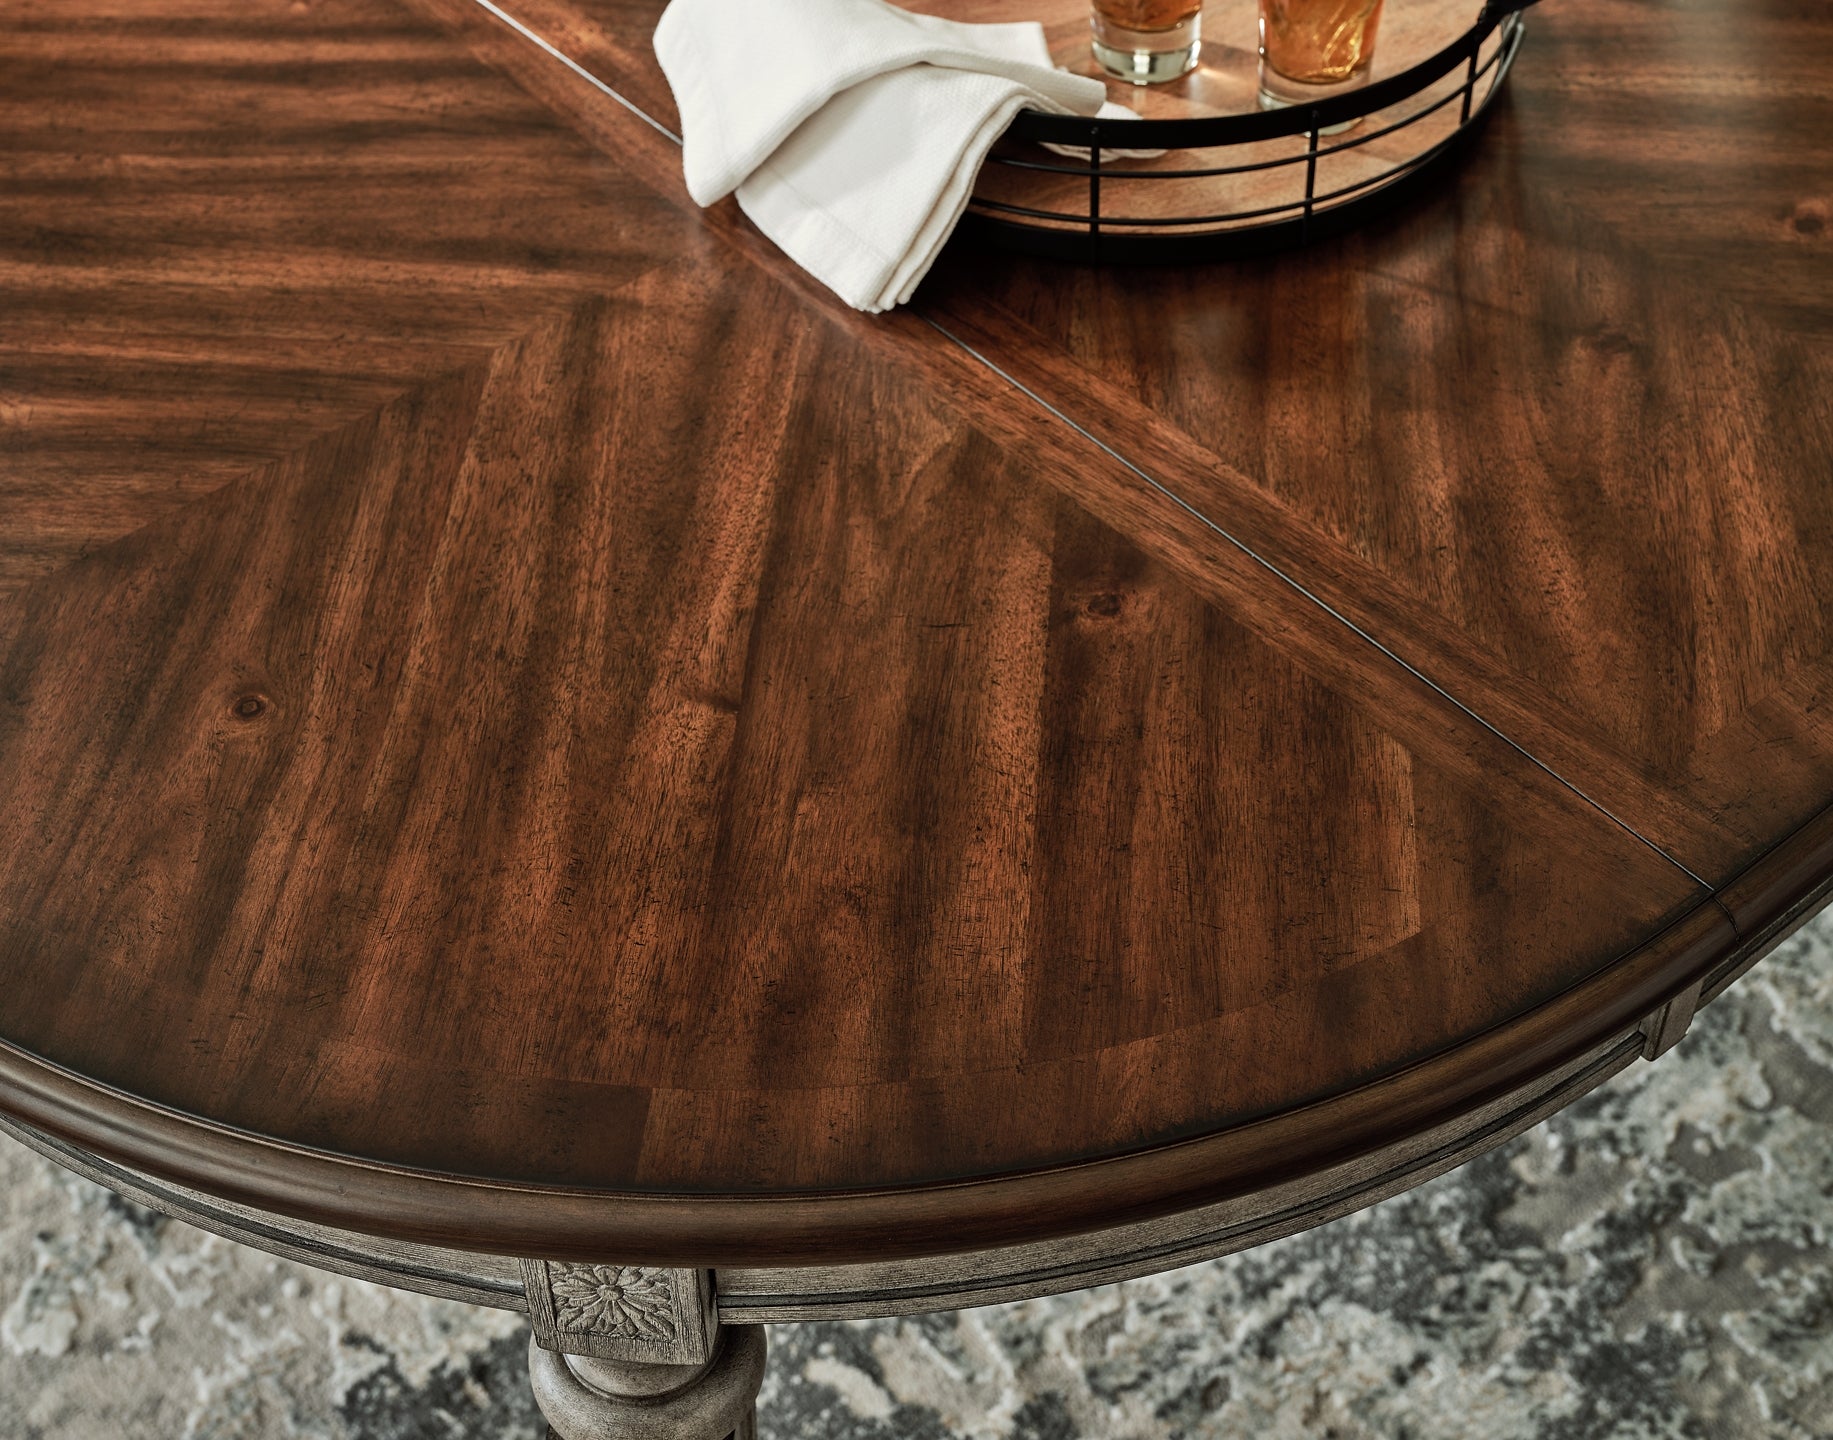 Lodenbay Oval Dining Room EXT Table JB's Furniture  Home Furniture, Home Decor, Furniture Store